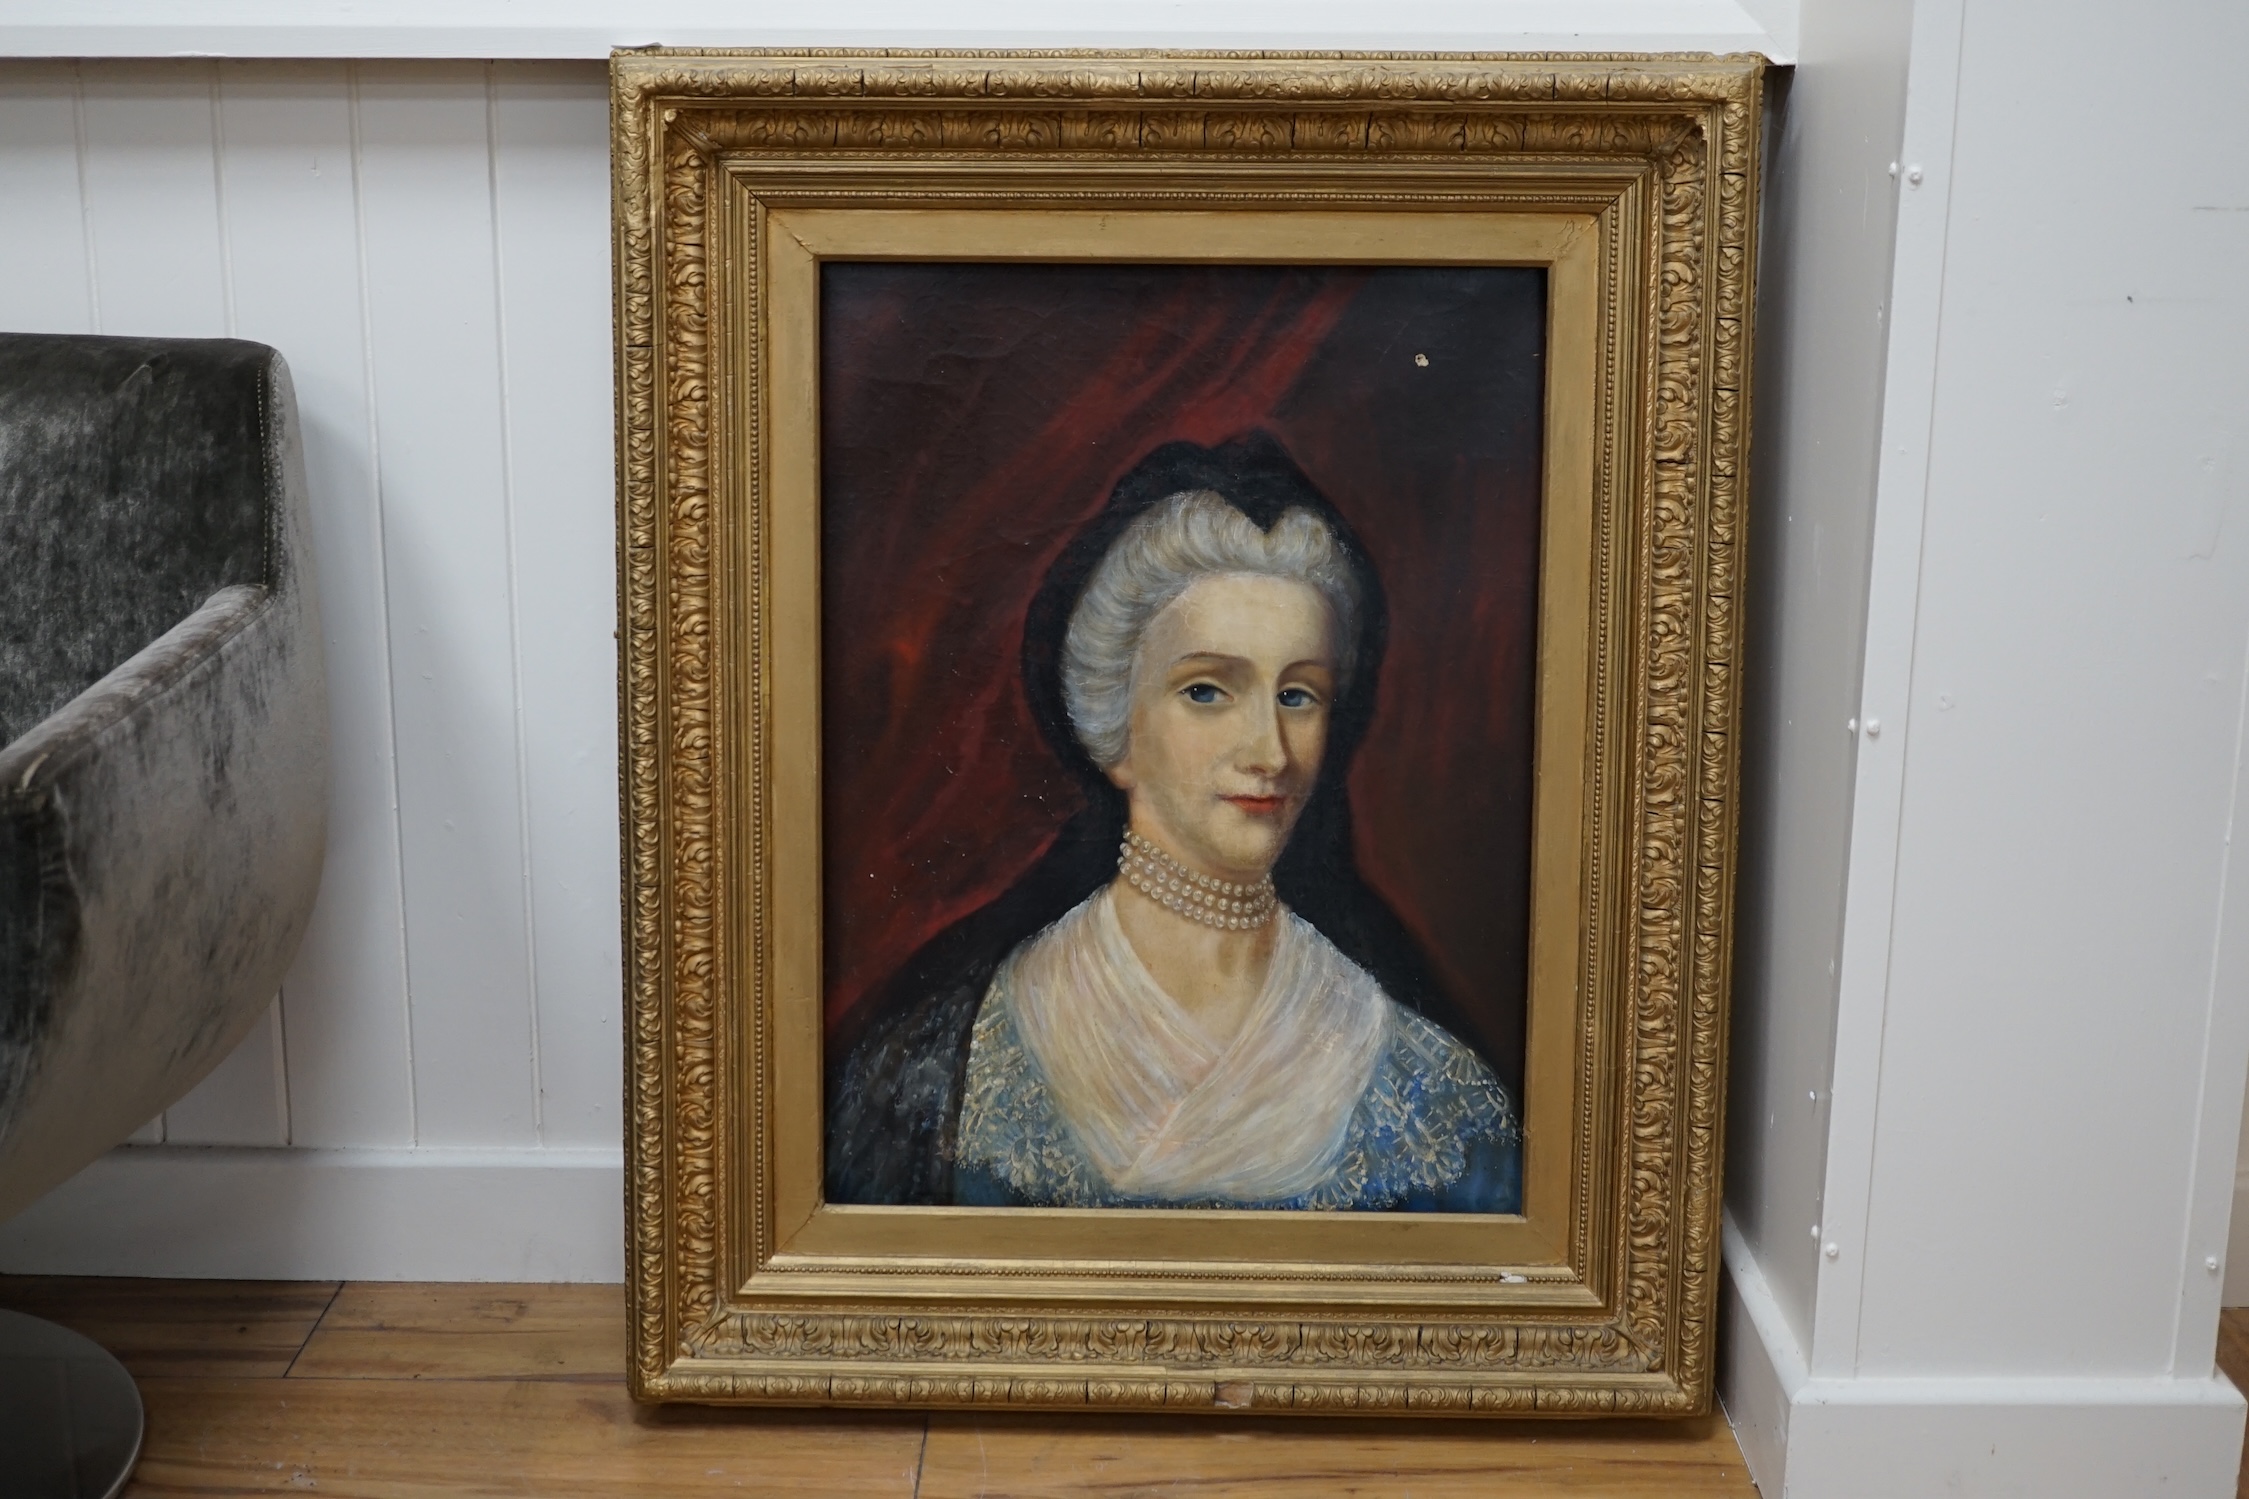 Early 19th century, oil on canvas, Portrait of a lady wearing a black veil and pearl choker necklace, unsigned, 60 x 46cm, ornate gilt frame. Condition - poor, canvas dirty and hole to upper right corner